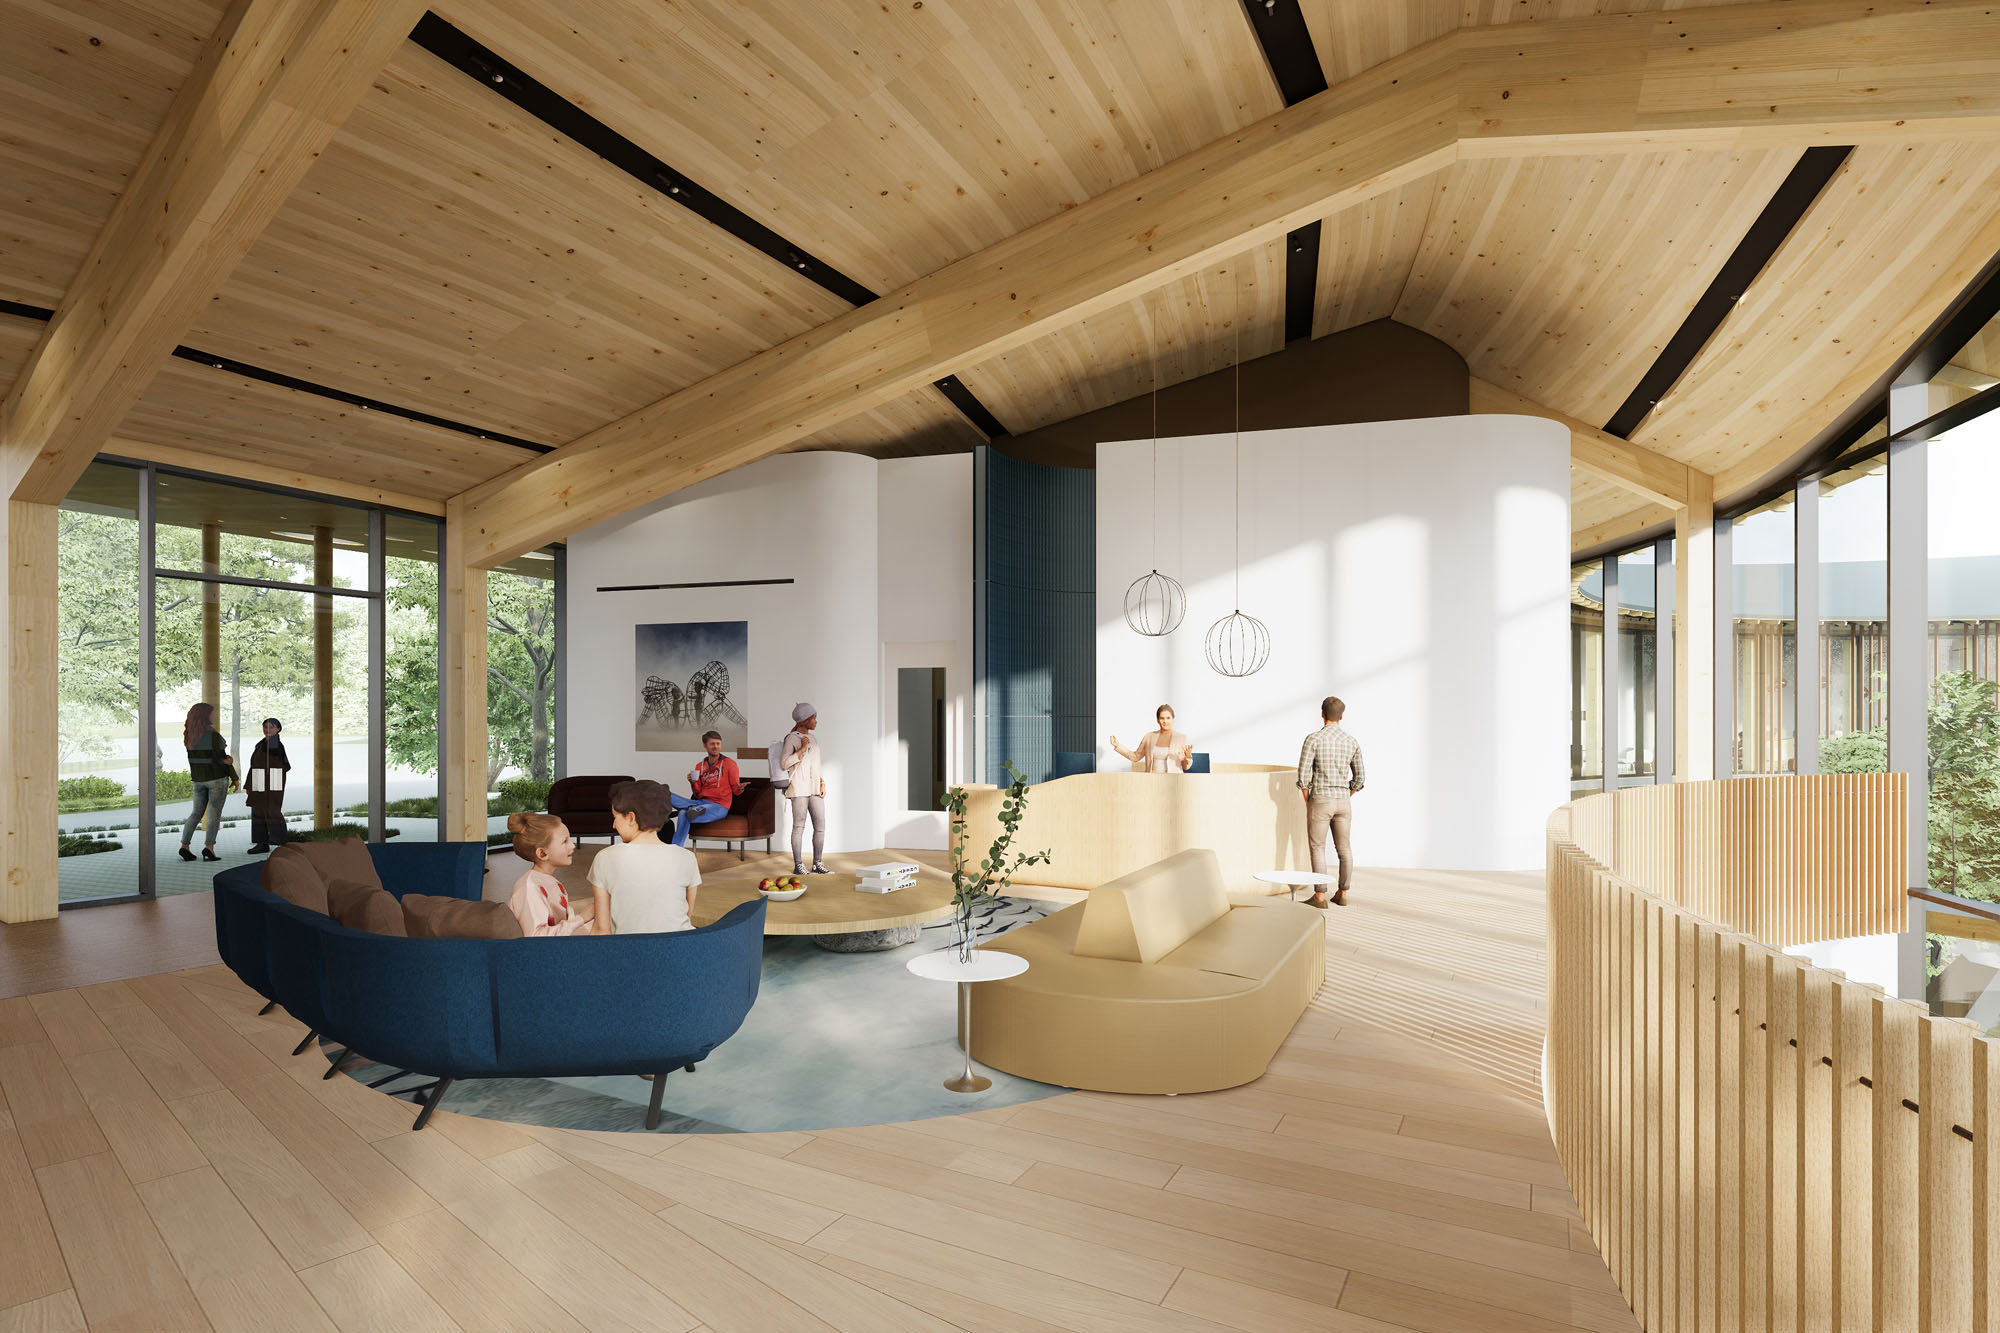 a rendering of a hospital lobby interior made of wood